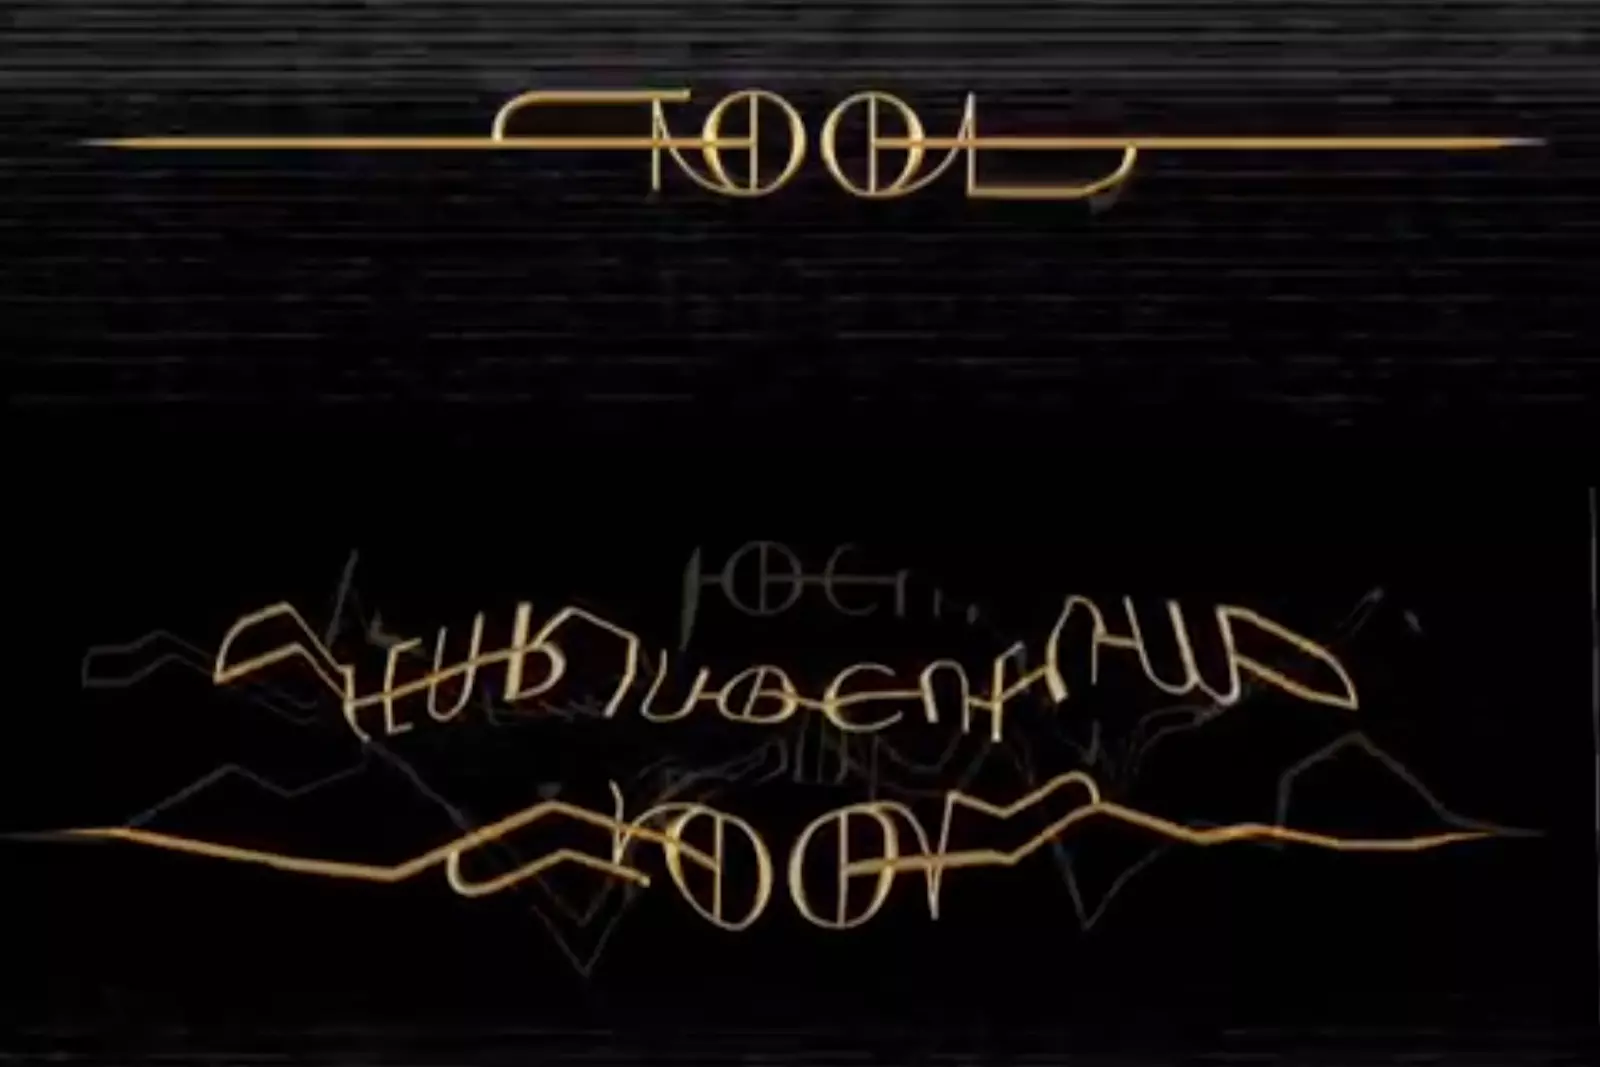 What's the Meaning of Tool's New Album Title 'Fear Inoculum'?